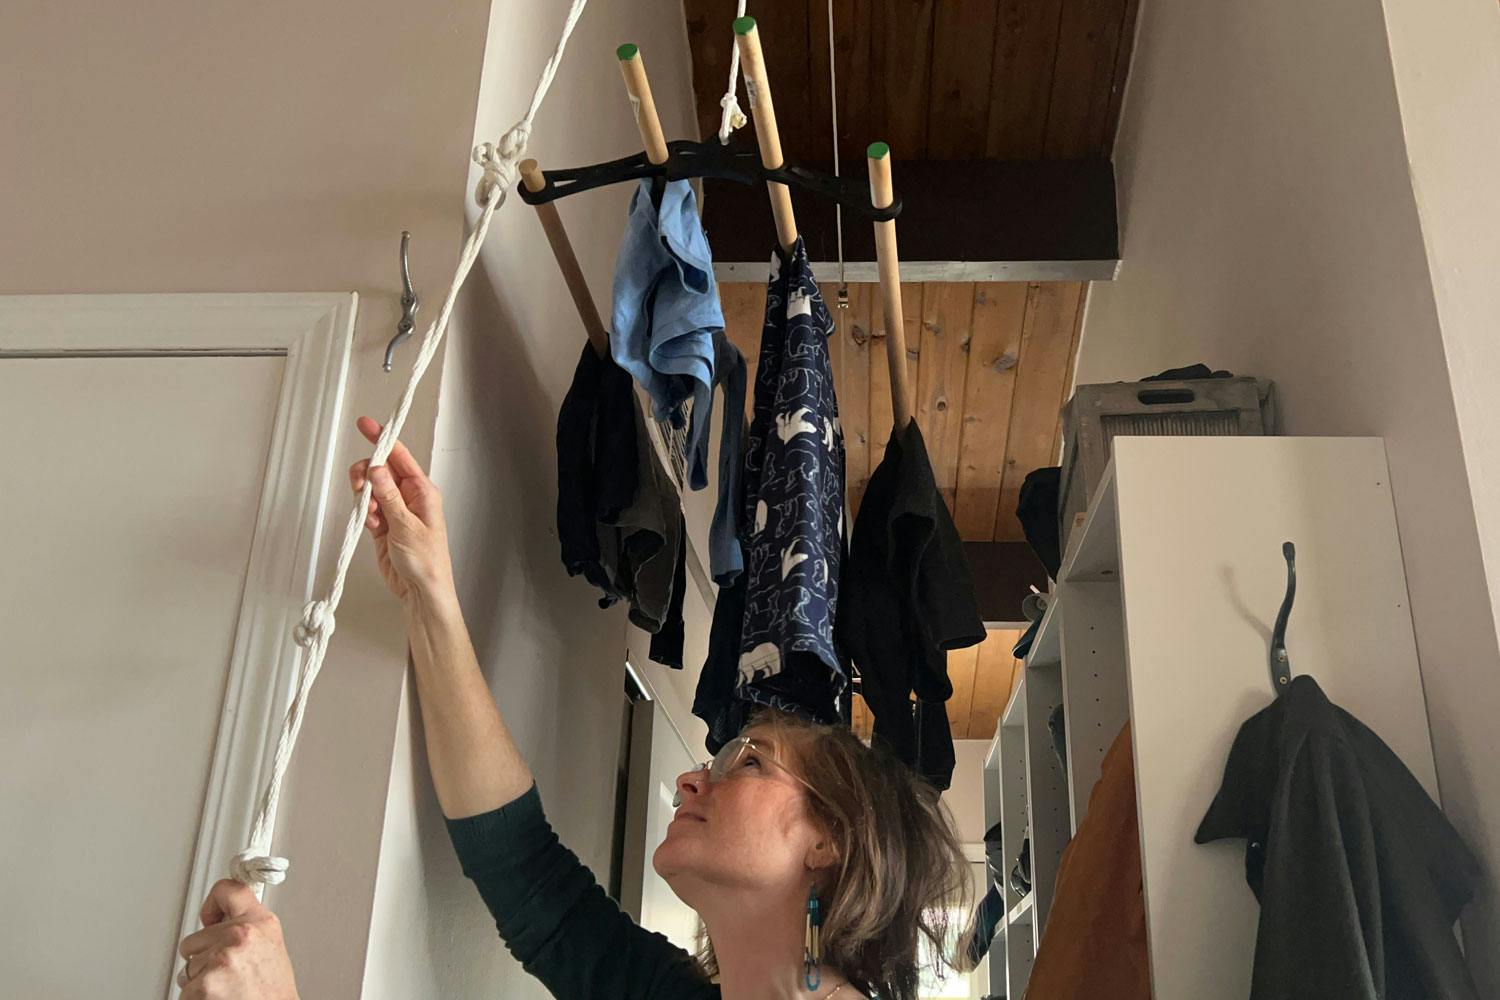 A woman pulls on a rope attached to a ceiling-mounted drying rack in the hallway of her home.